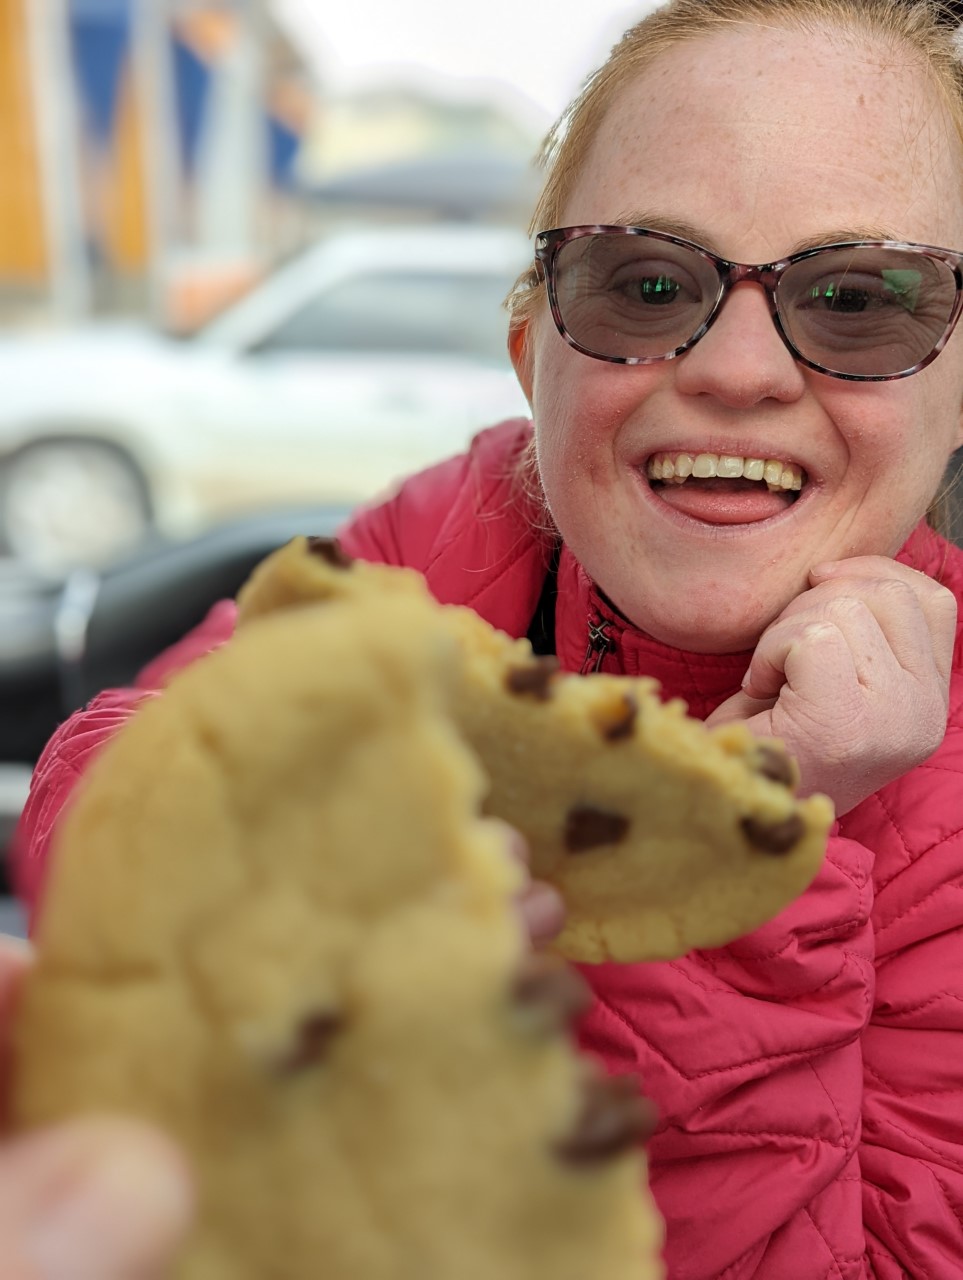 Young woman with Down syndrome smiles while toasting her mom with a chocolate chip cookie she baked at her new bakery job.